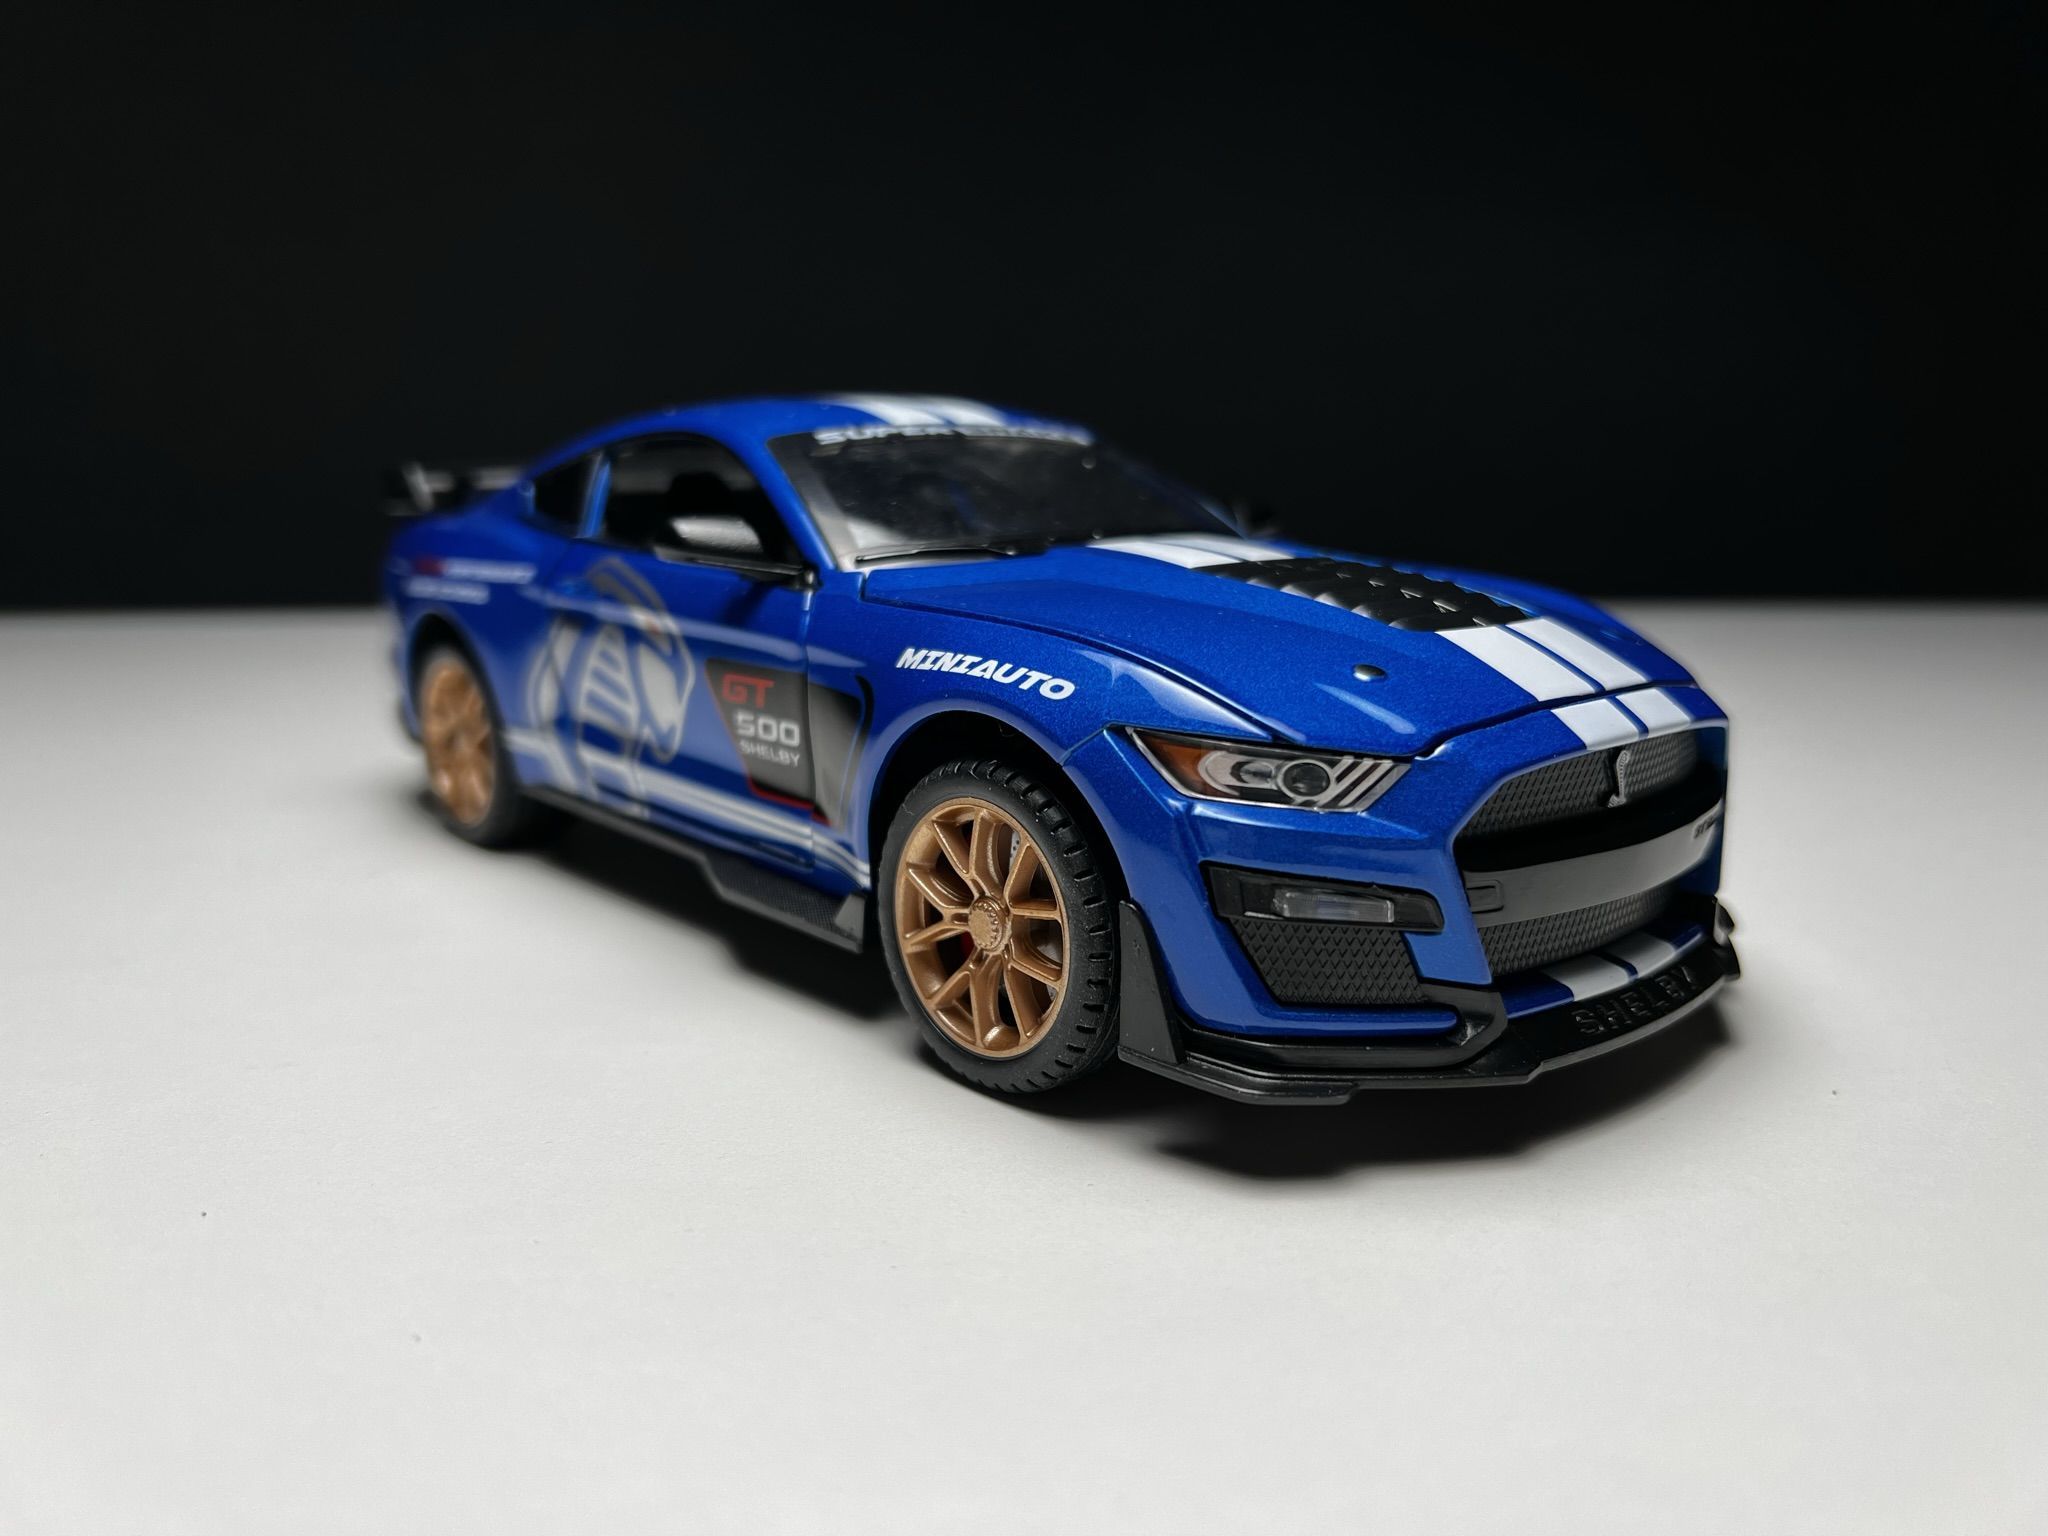 Машинка металлическая Элемент Ford Mustang Shelby 1:24 машинка металлическая элемент dodge charger red 1 32